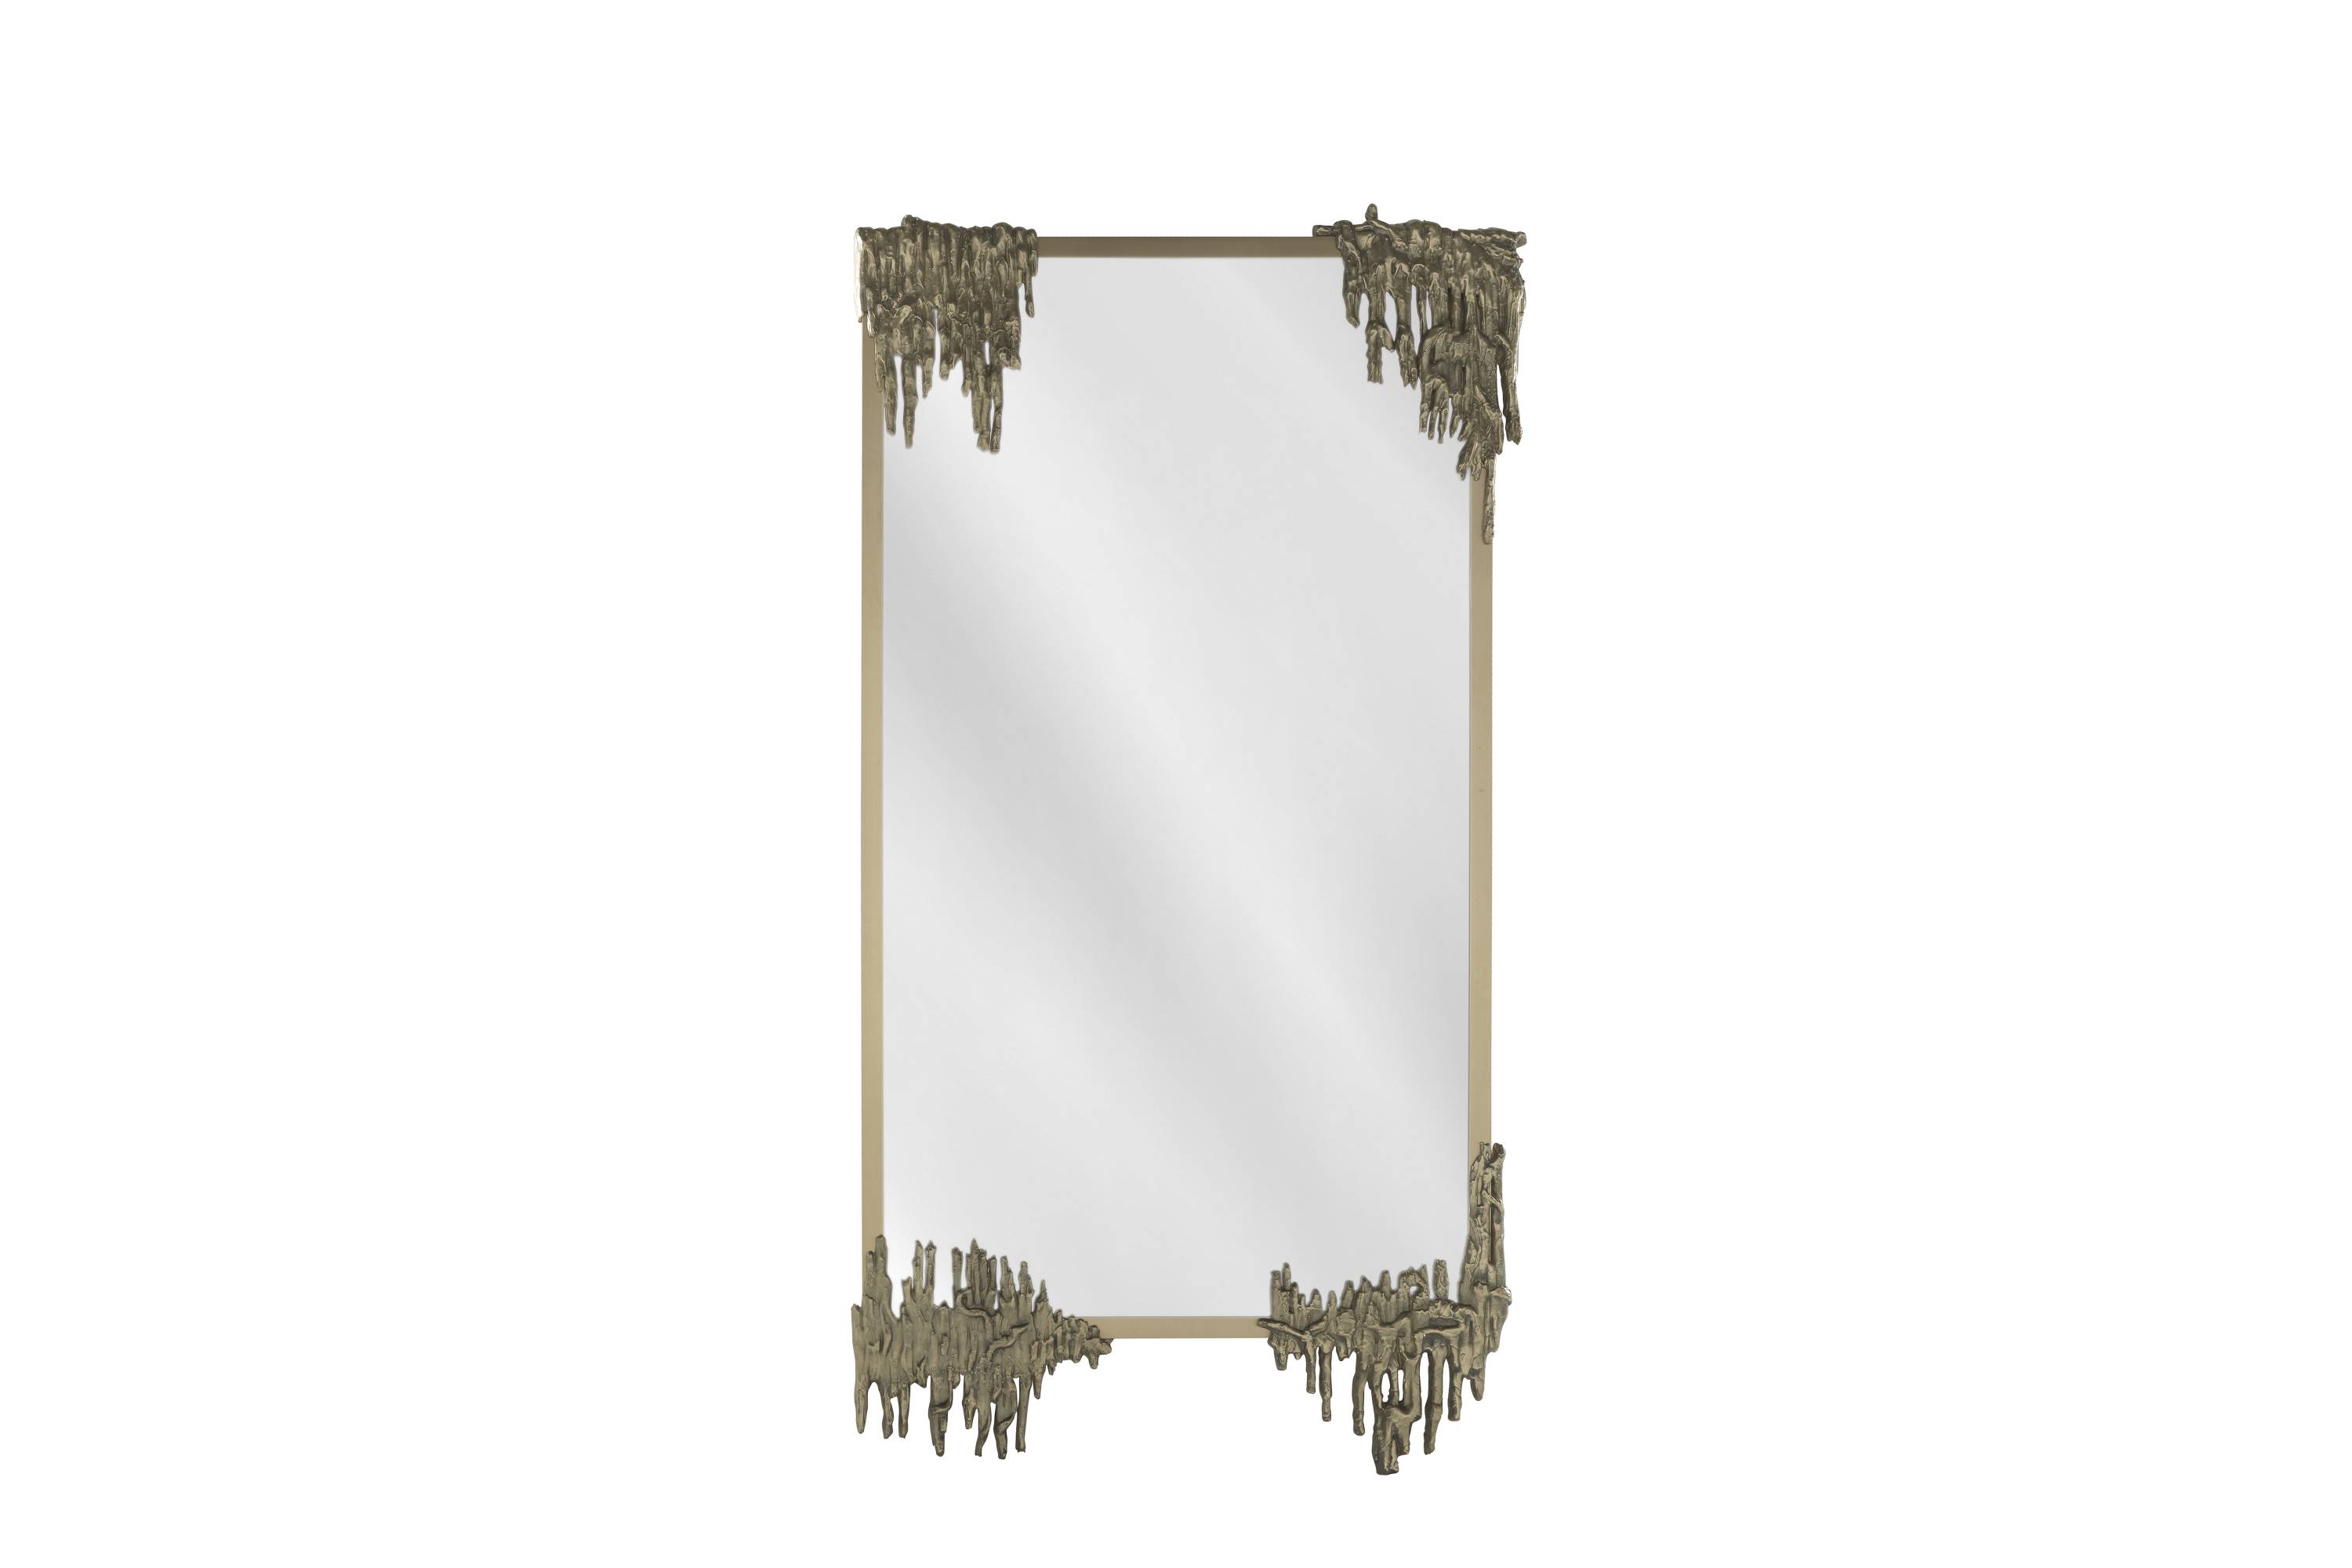 IZUMI mirror - Discover the elegance of luxury Oro Bianco collection by Jumbo collection